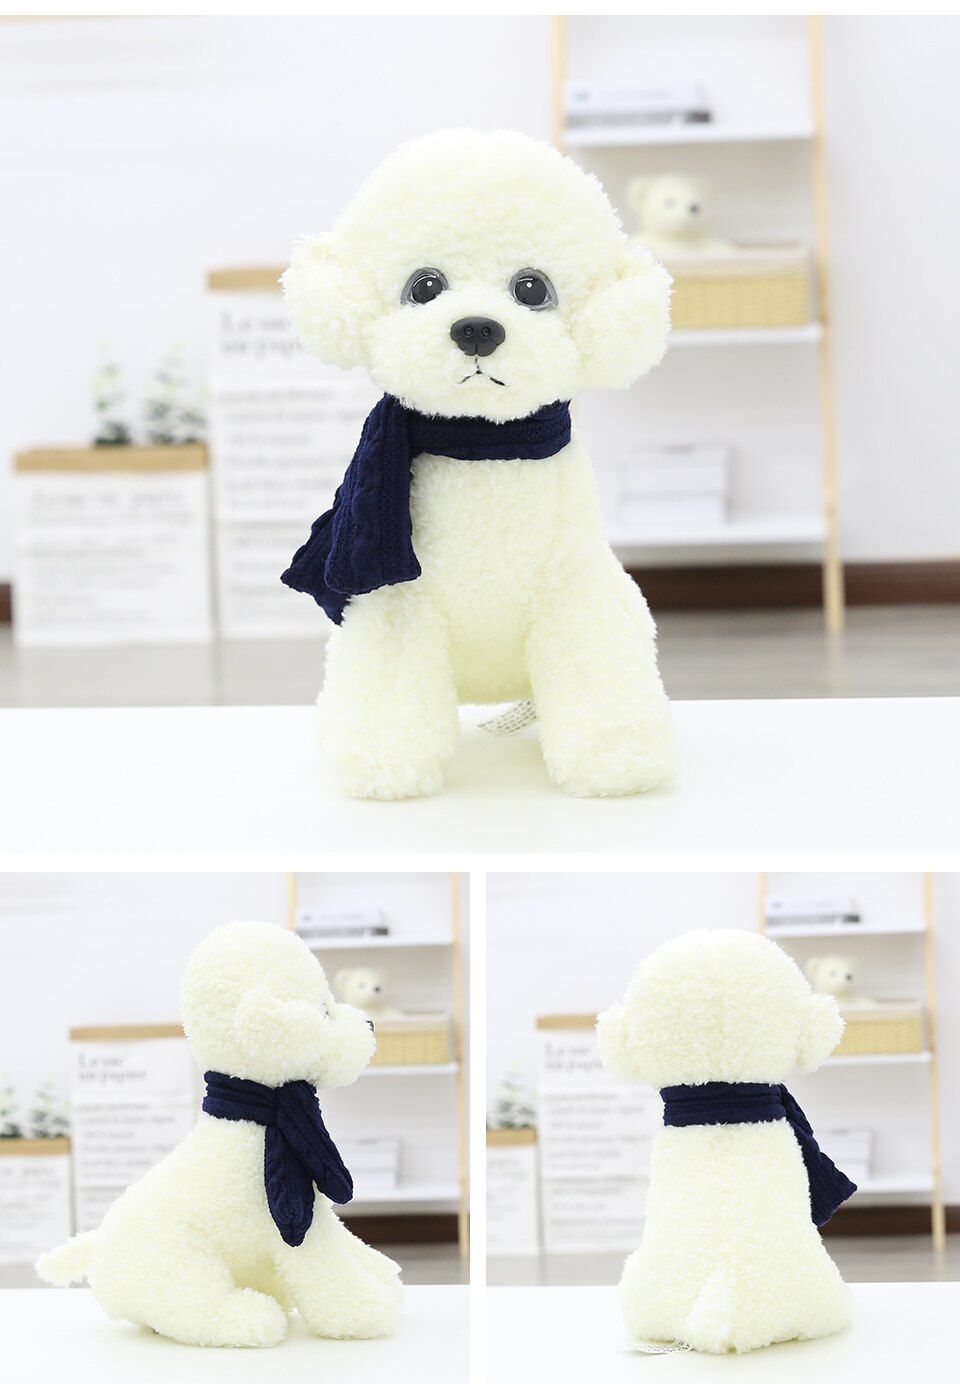 Little Poodle Dog Plush Toy Girl Birthday Present Doesn't Shed Hair New 25cm Kawaii Simulation Cute Christmas Gift for Kids